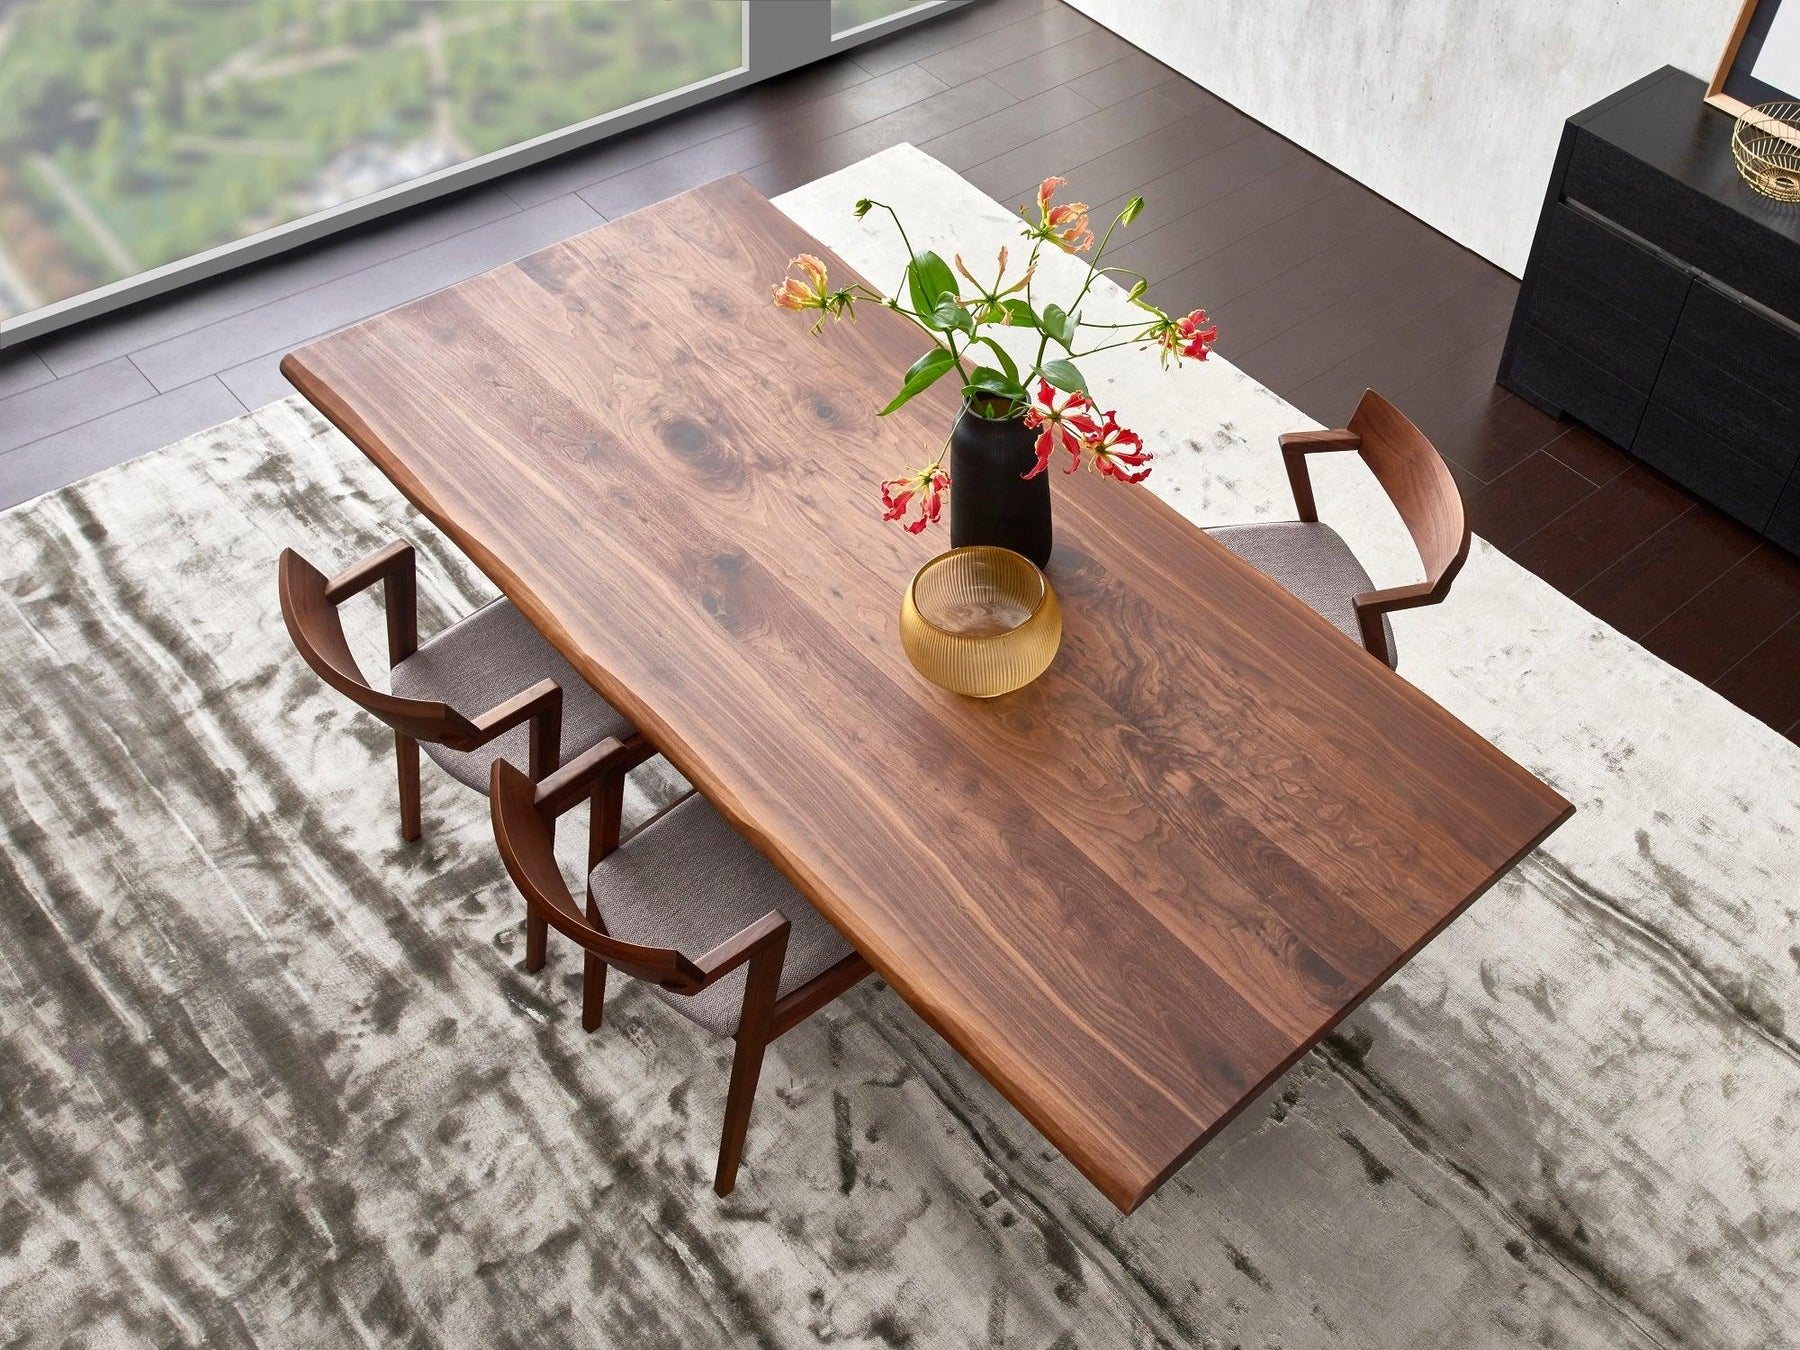 Choosing The Right Dining Table For Your Home - HomesToLife